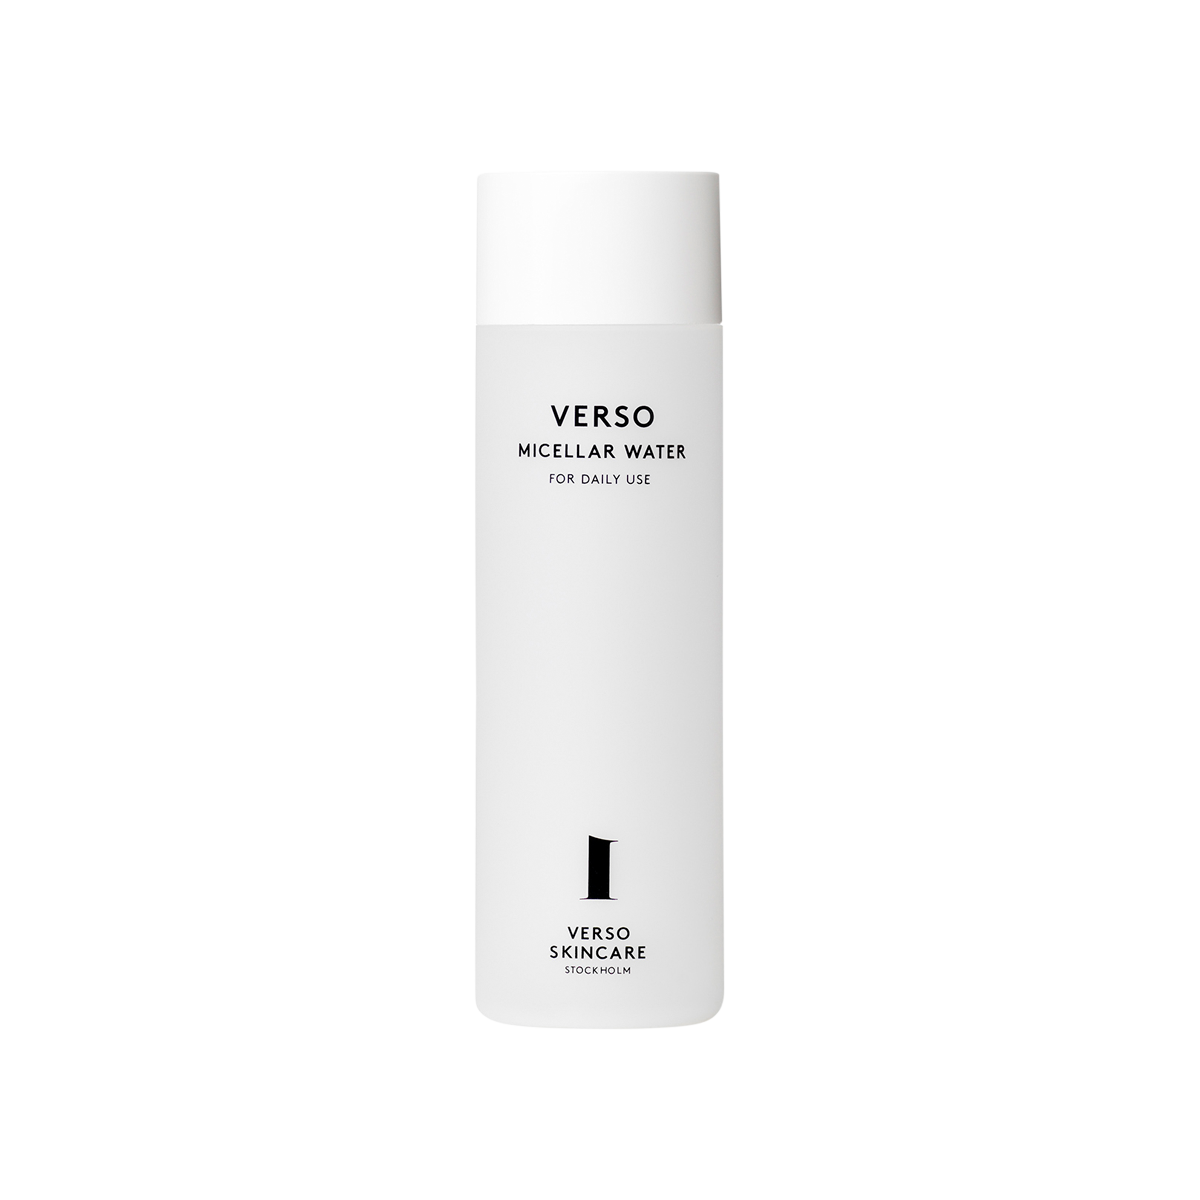 Verso - Micellar Water for daily use